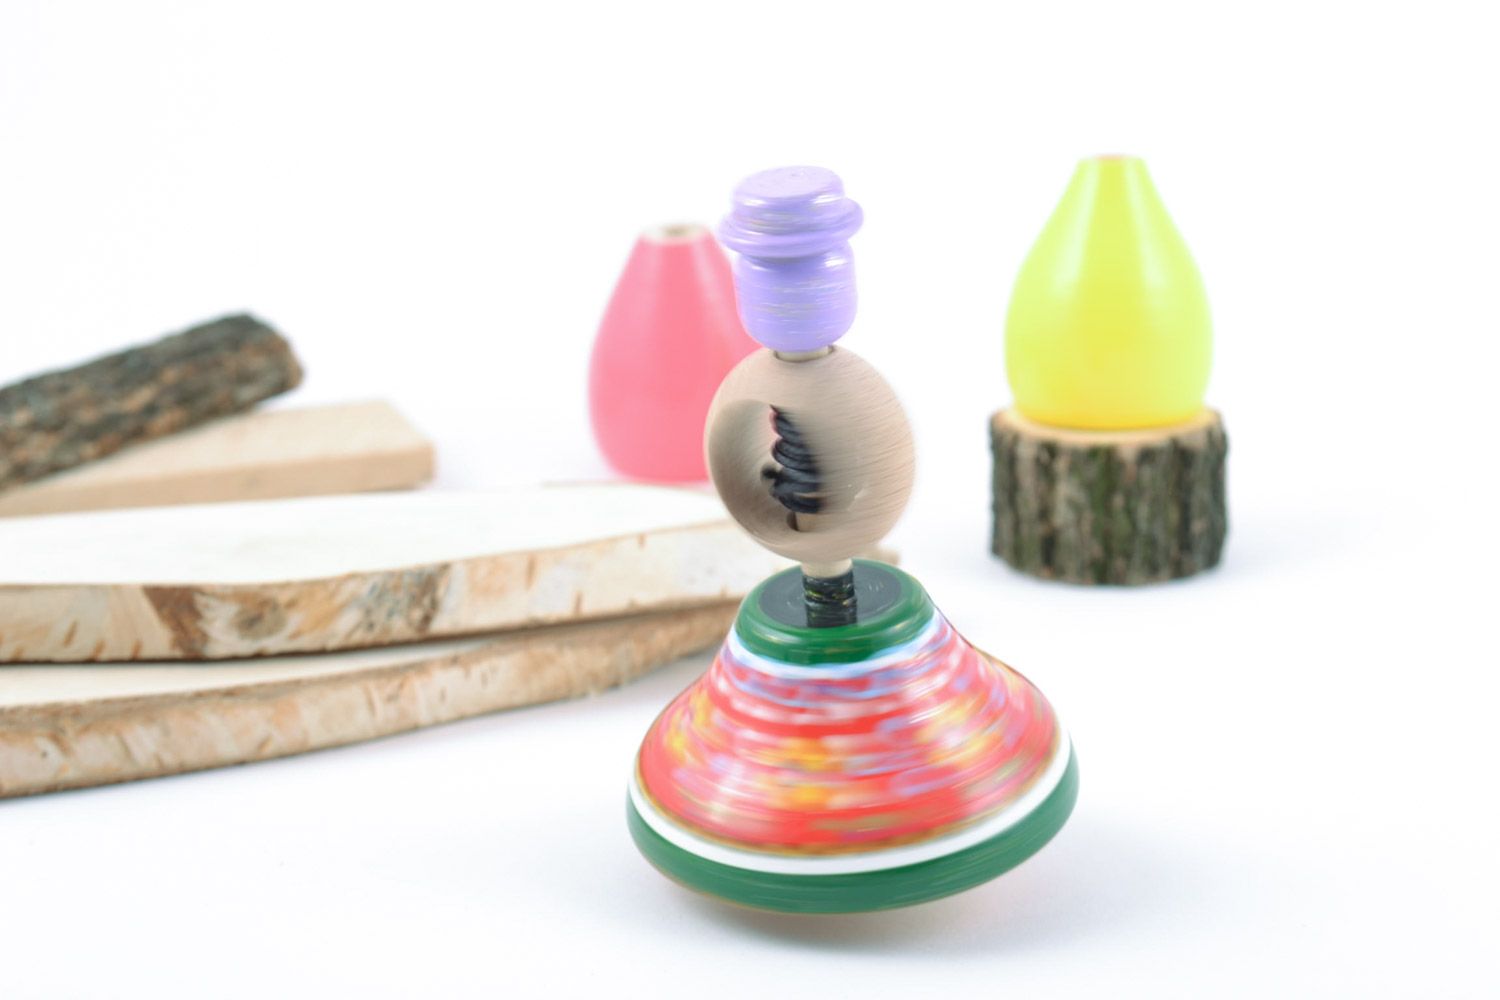 Homemade bright painted educational wooden eco toy spinning top for children photo 1